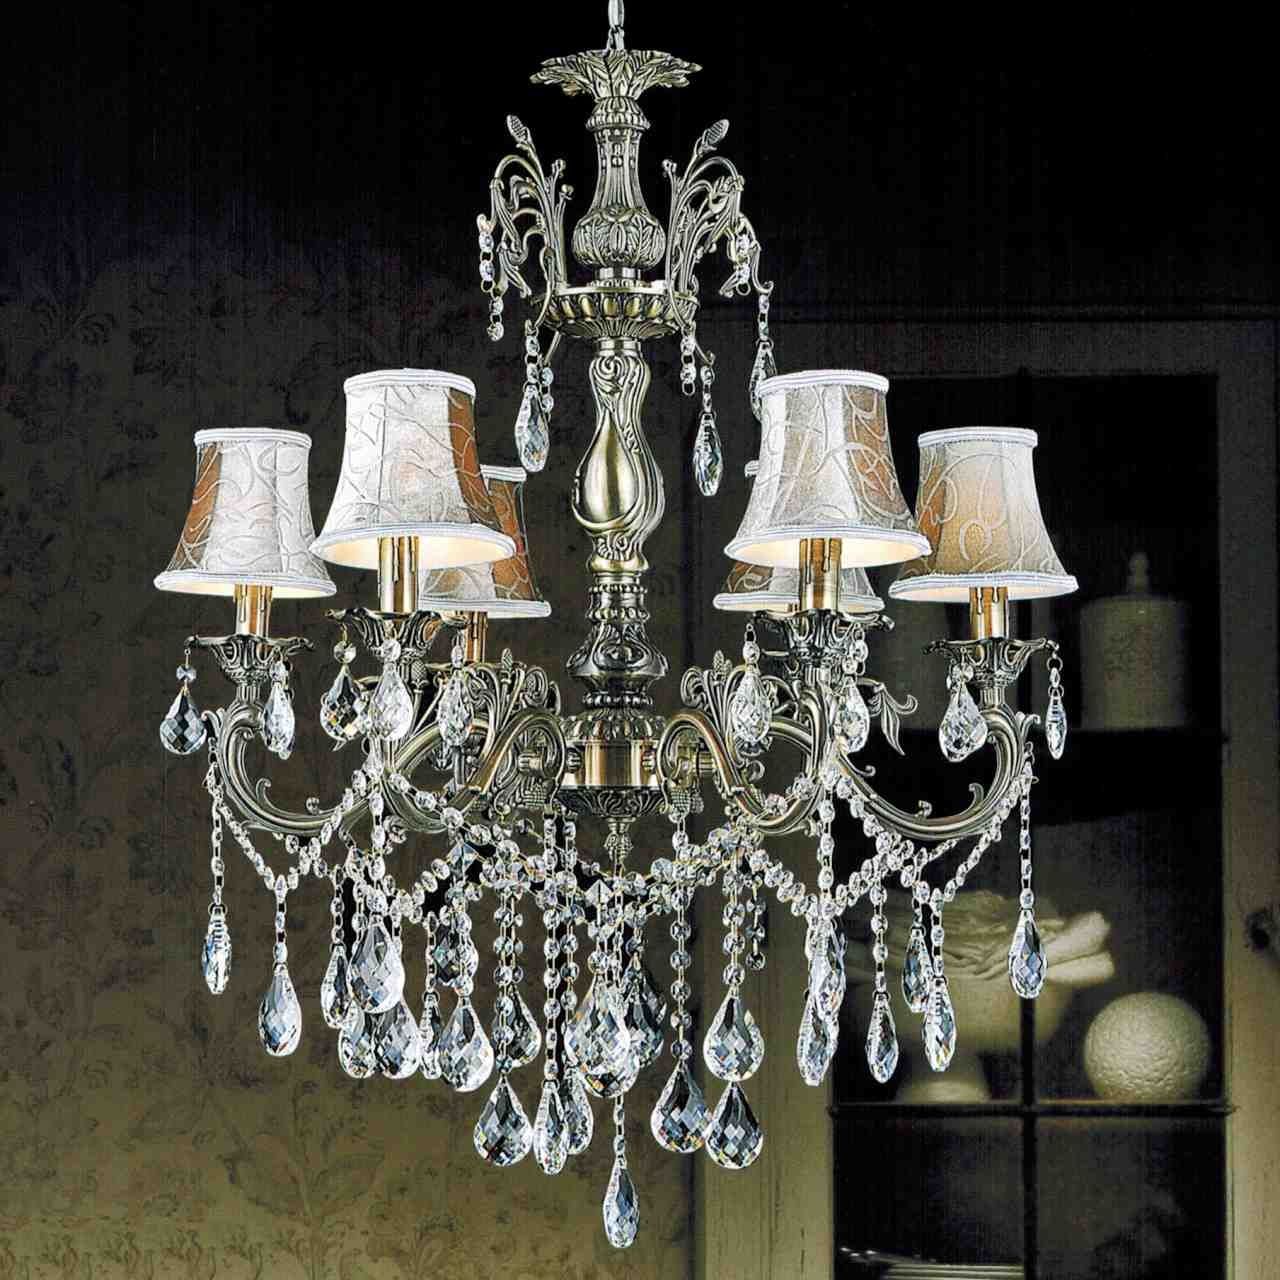 Lamps Awesome Crystal Chandelier Lamp Shades Artistic Color Intended For Chandelier With Shades And Crystals (View 18 of 25)